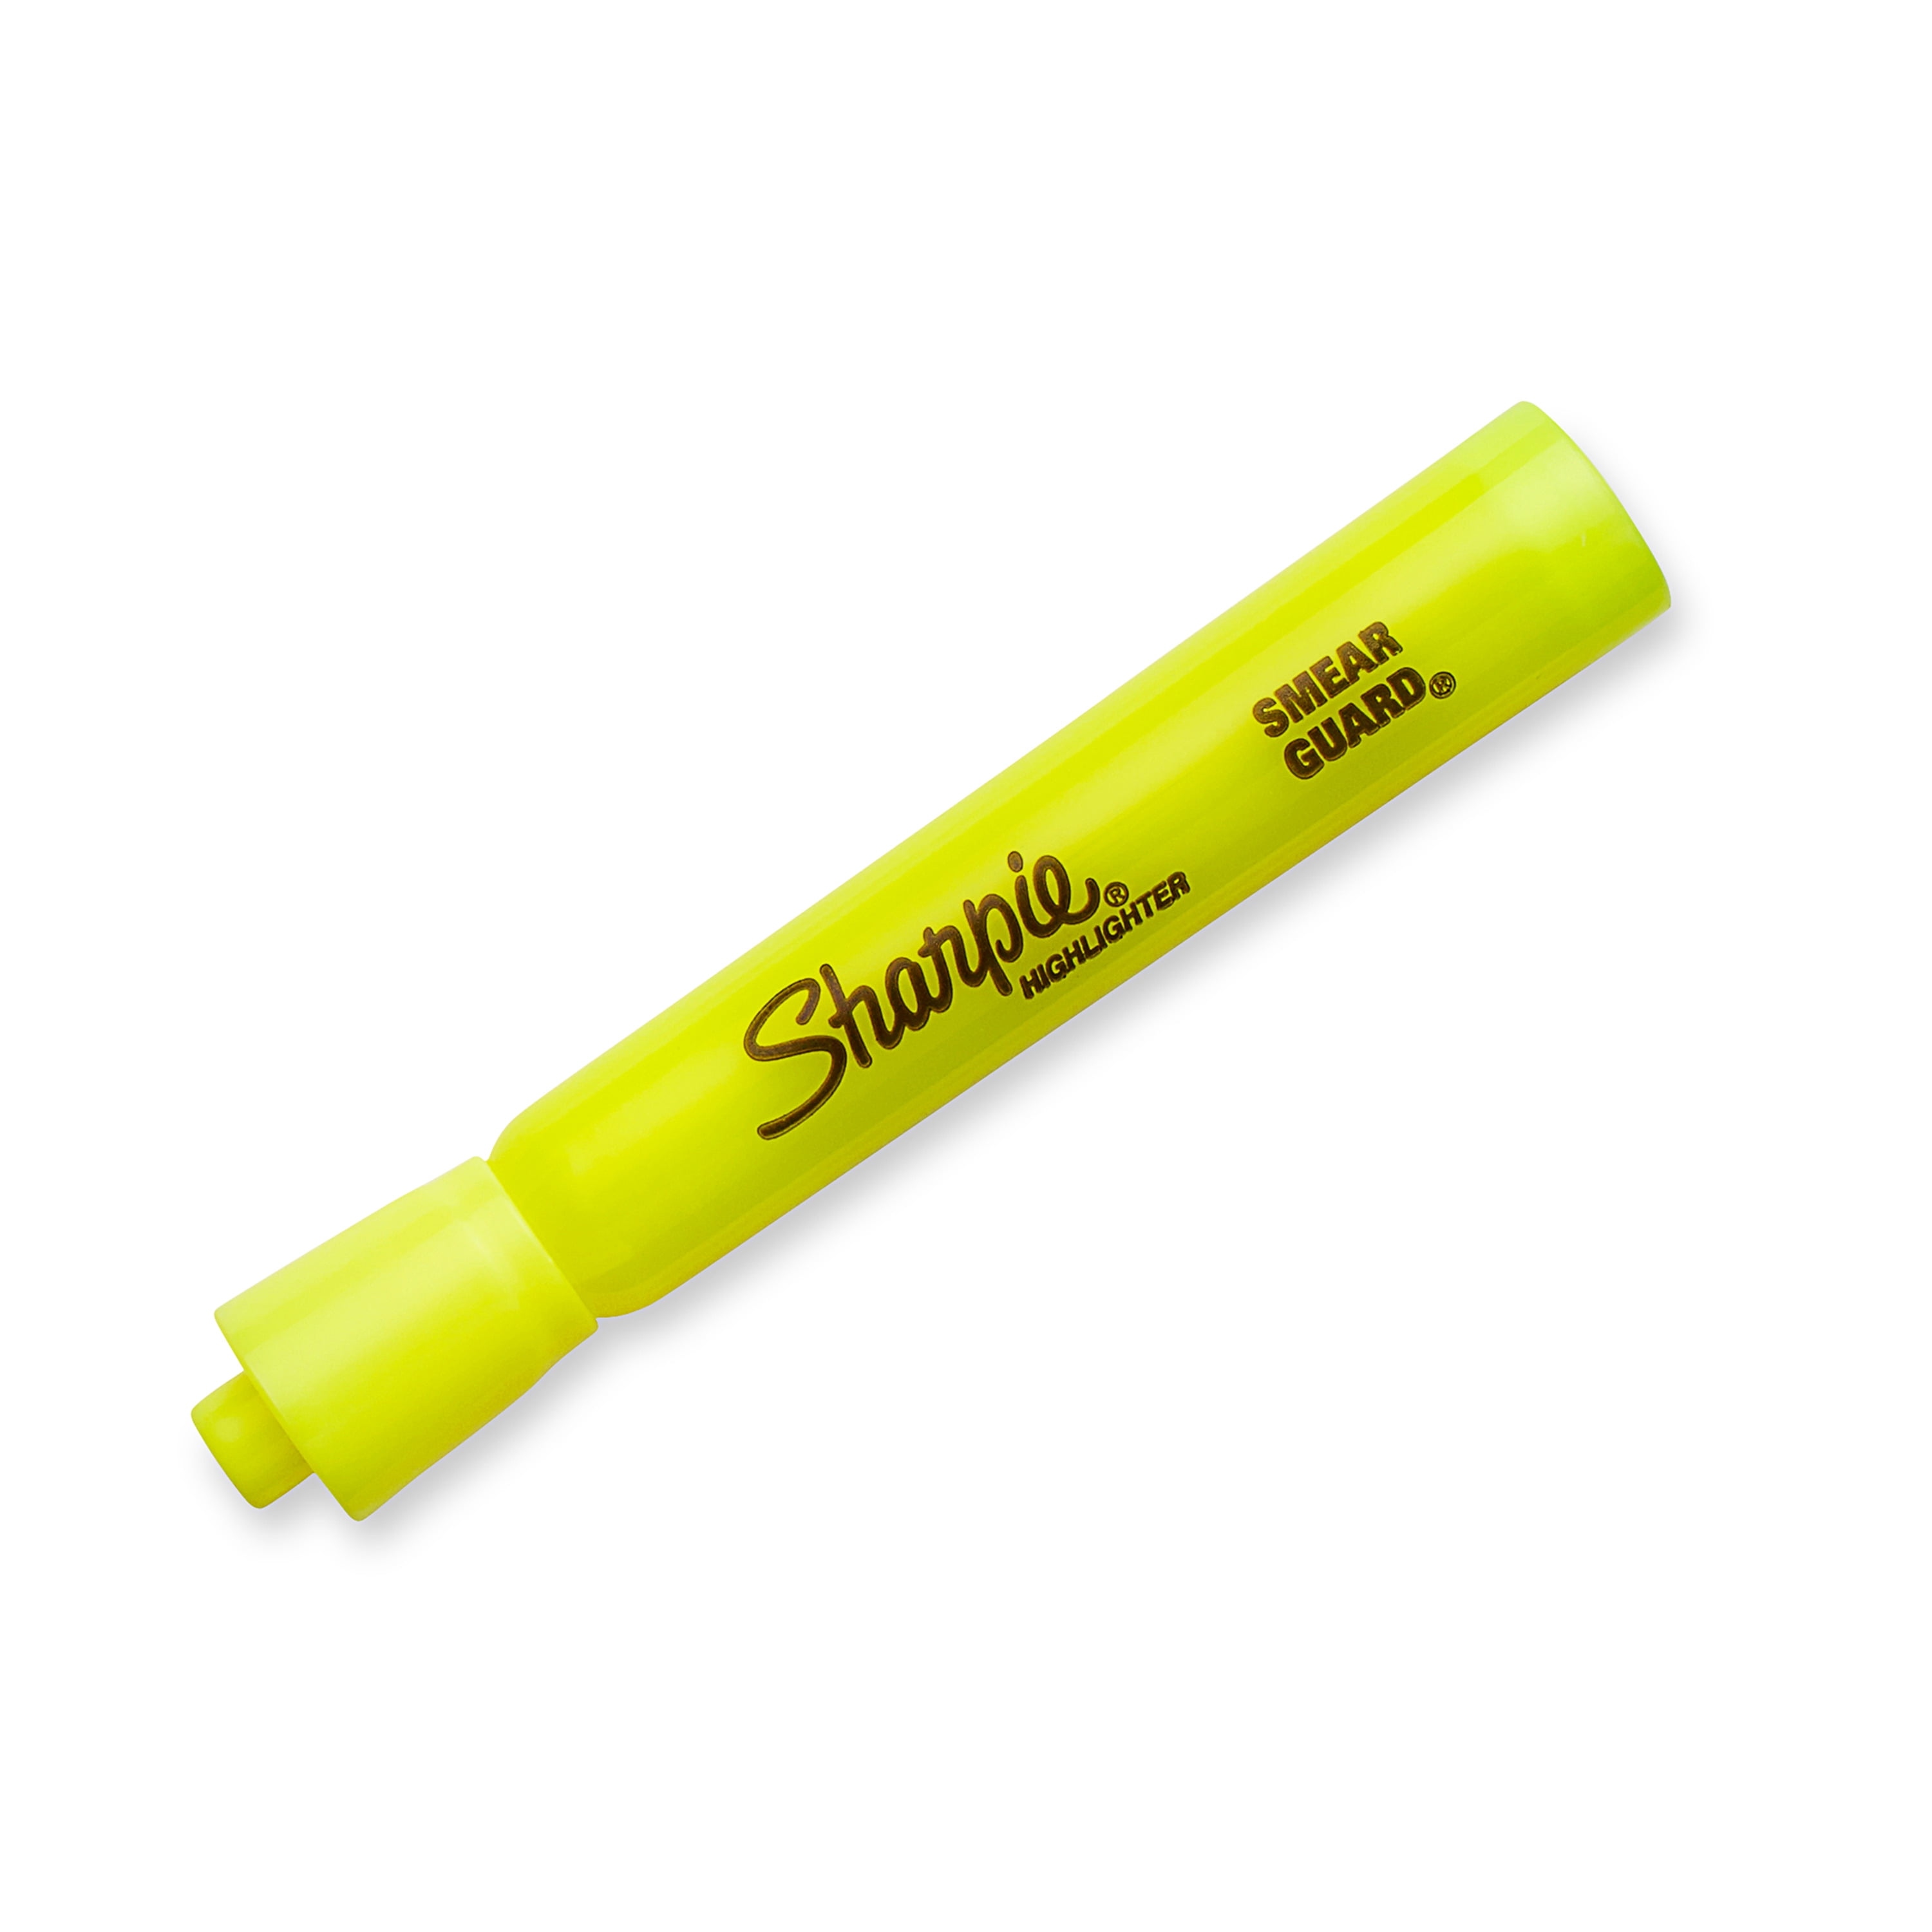 Sharpie SmearGuard Tank Style Highlighters (Fluorescent Yellow) - 36/Pack  (1920938)